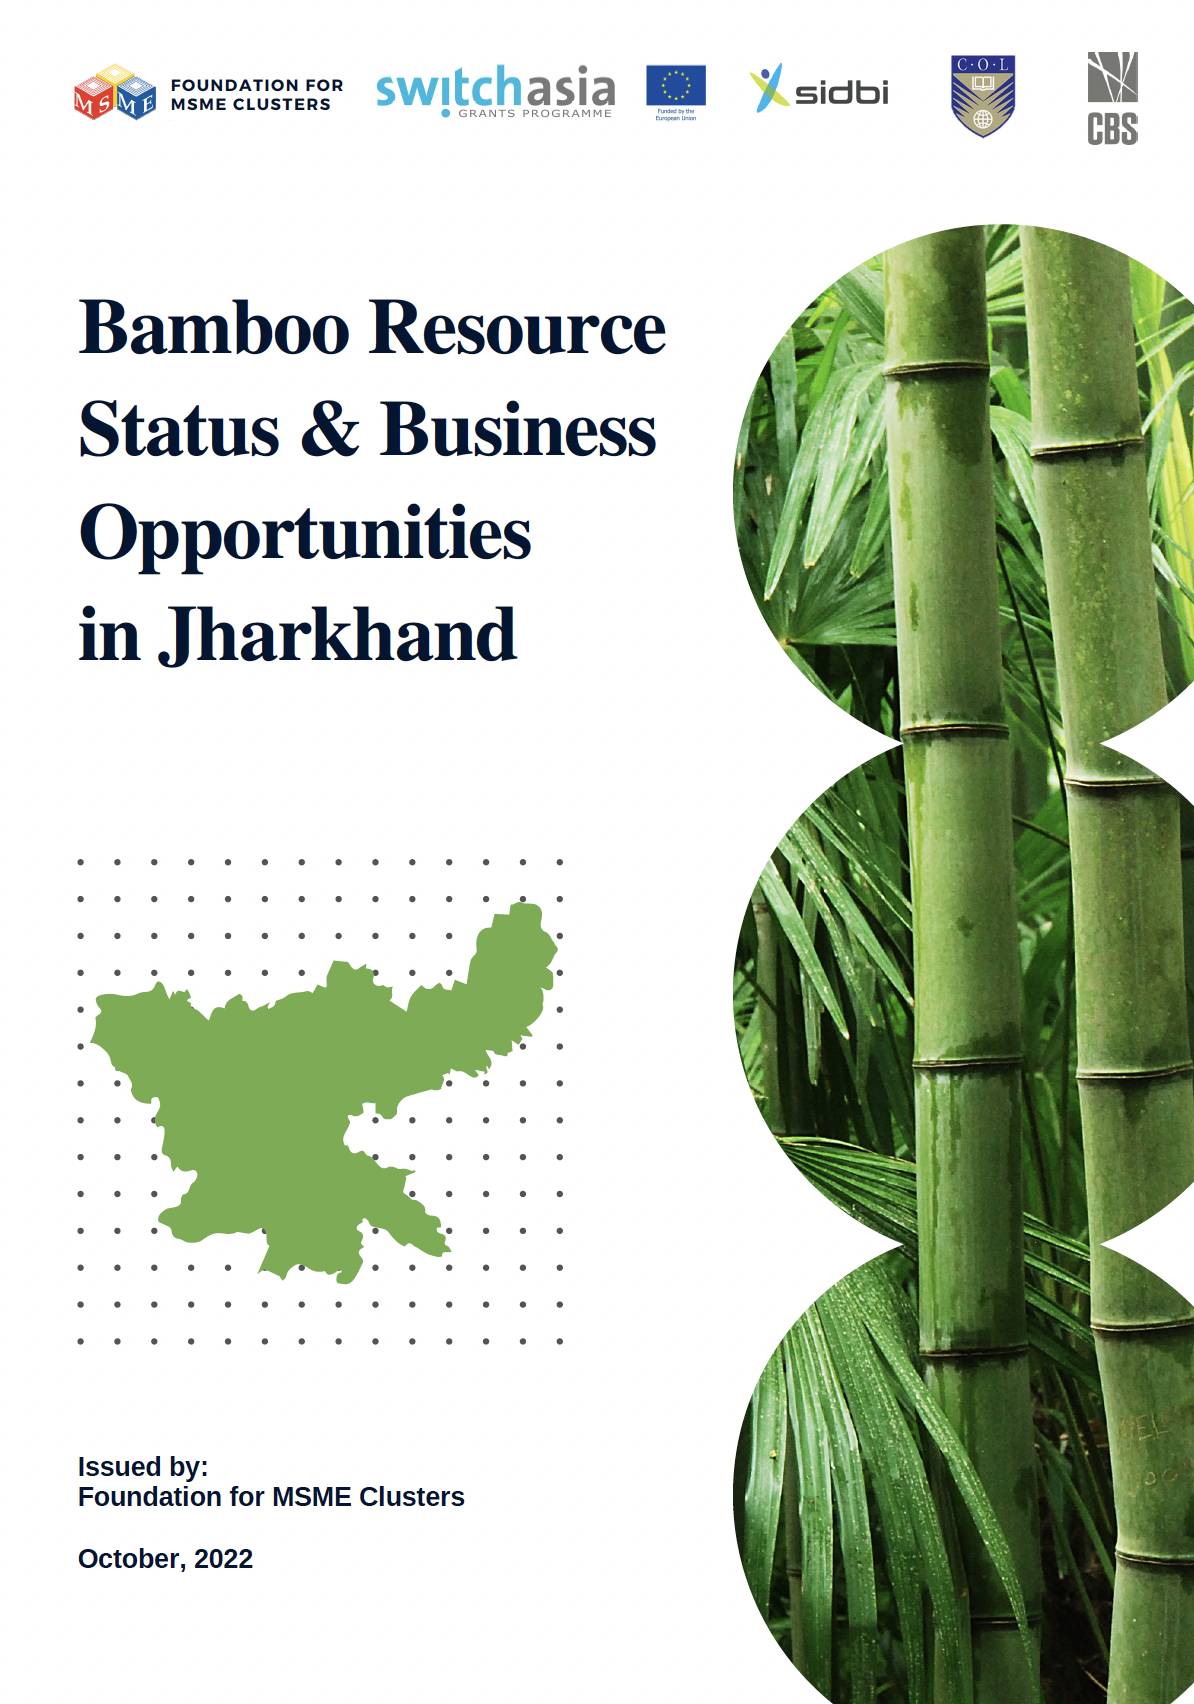 Bamboo Resource Status & Business Opportunities in Jharkhand